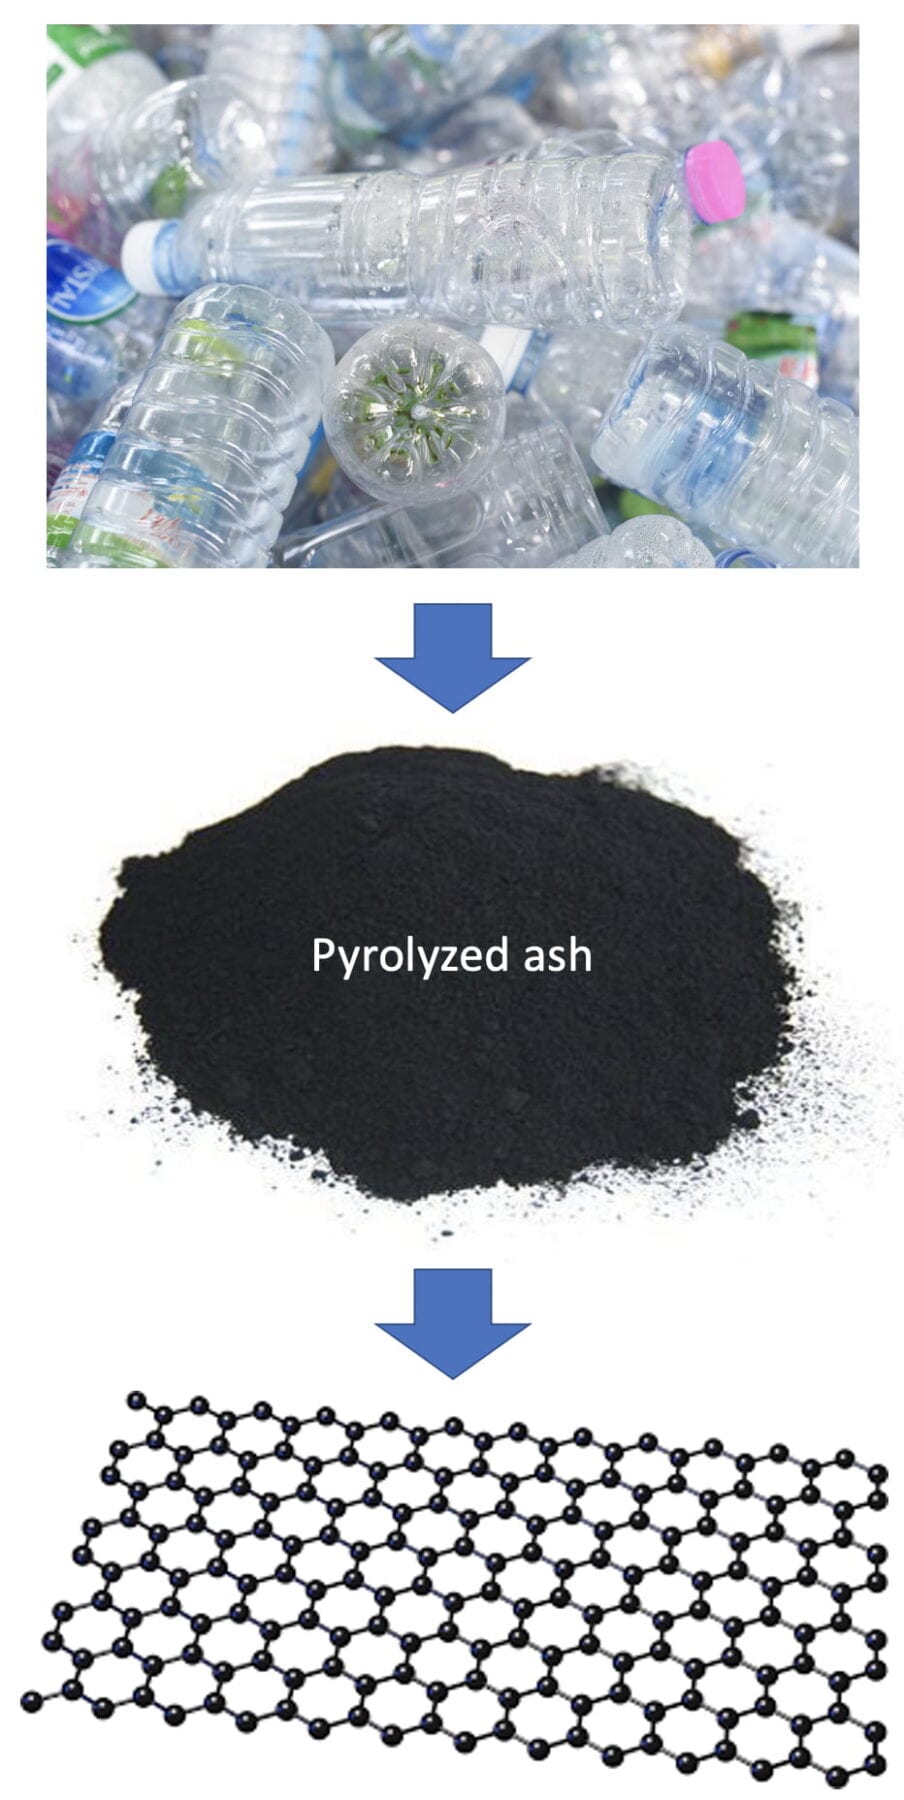 Rice University chemists turned otherwise-worthless pyrolyzed ash from plastic recycling into graphene through a Joule heating process. The graphene could be used to strengthen concrete and toughen plastics used in medicine, energy and packaging applications. Courtesy of the Tour Group